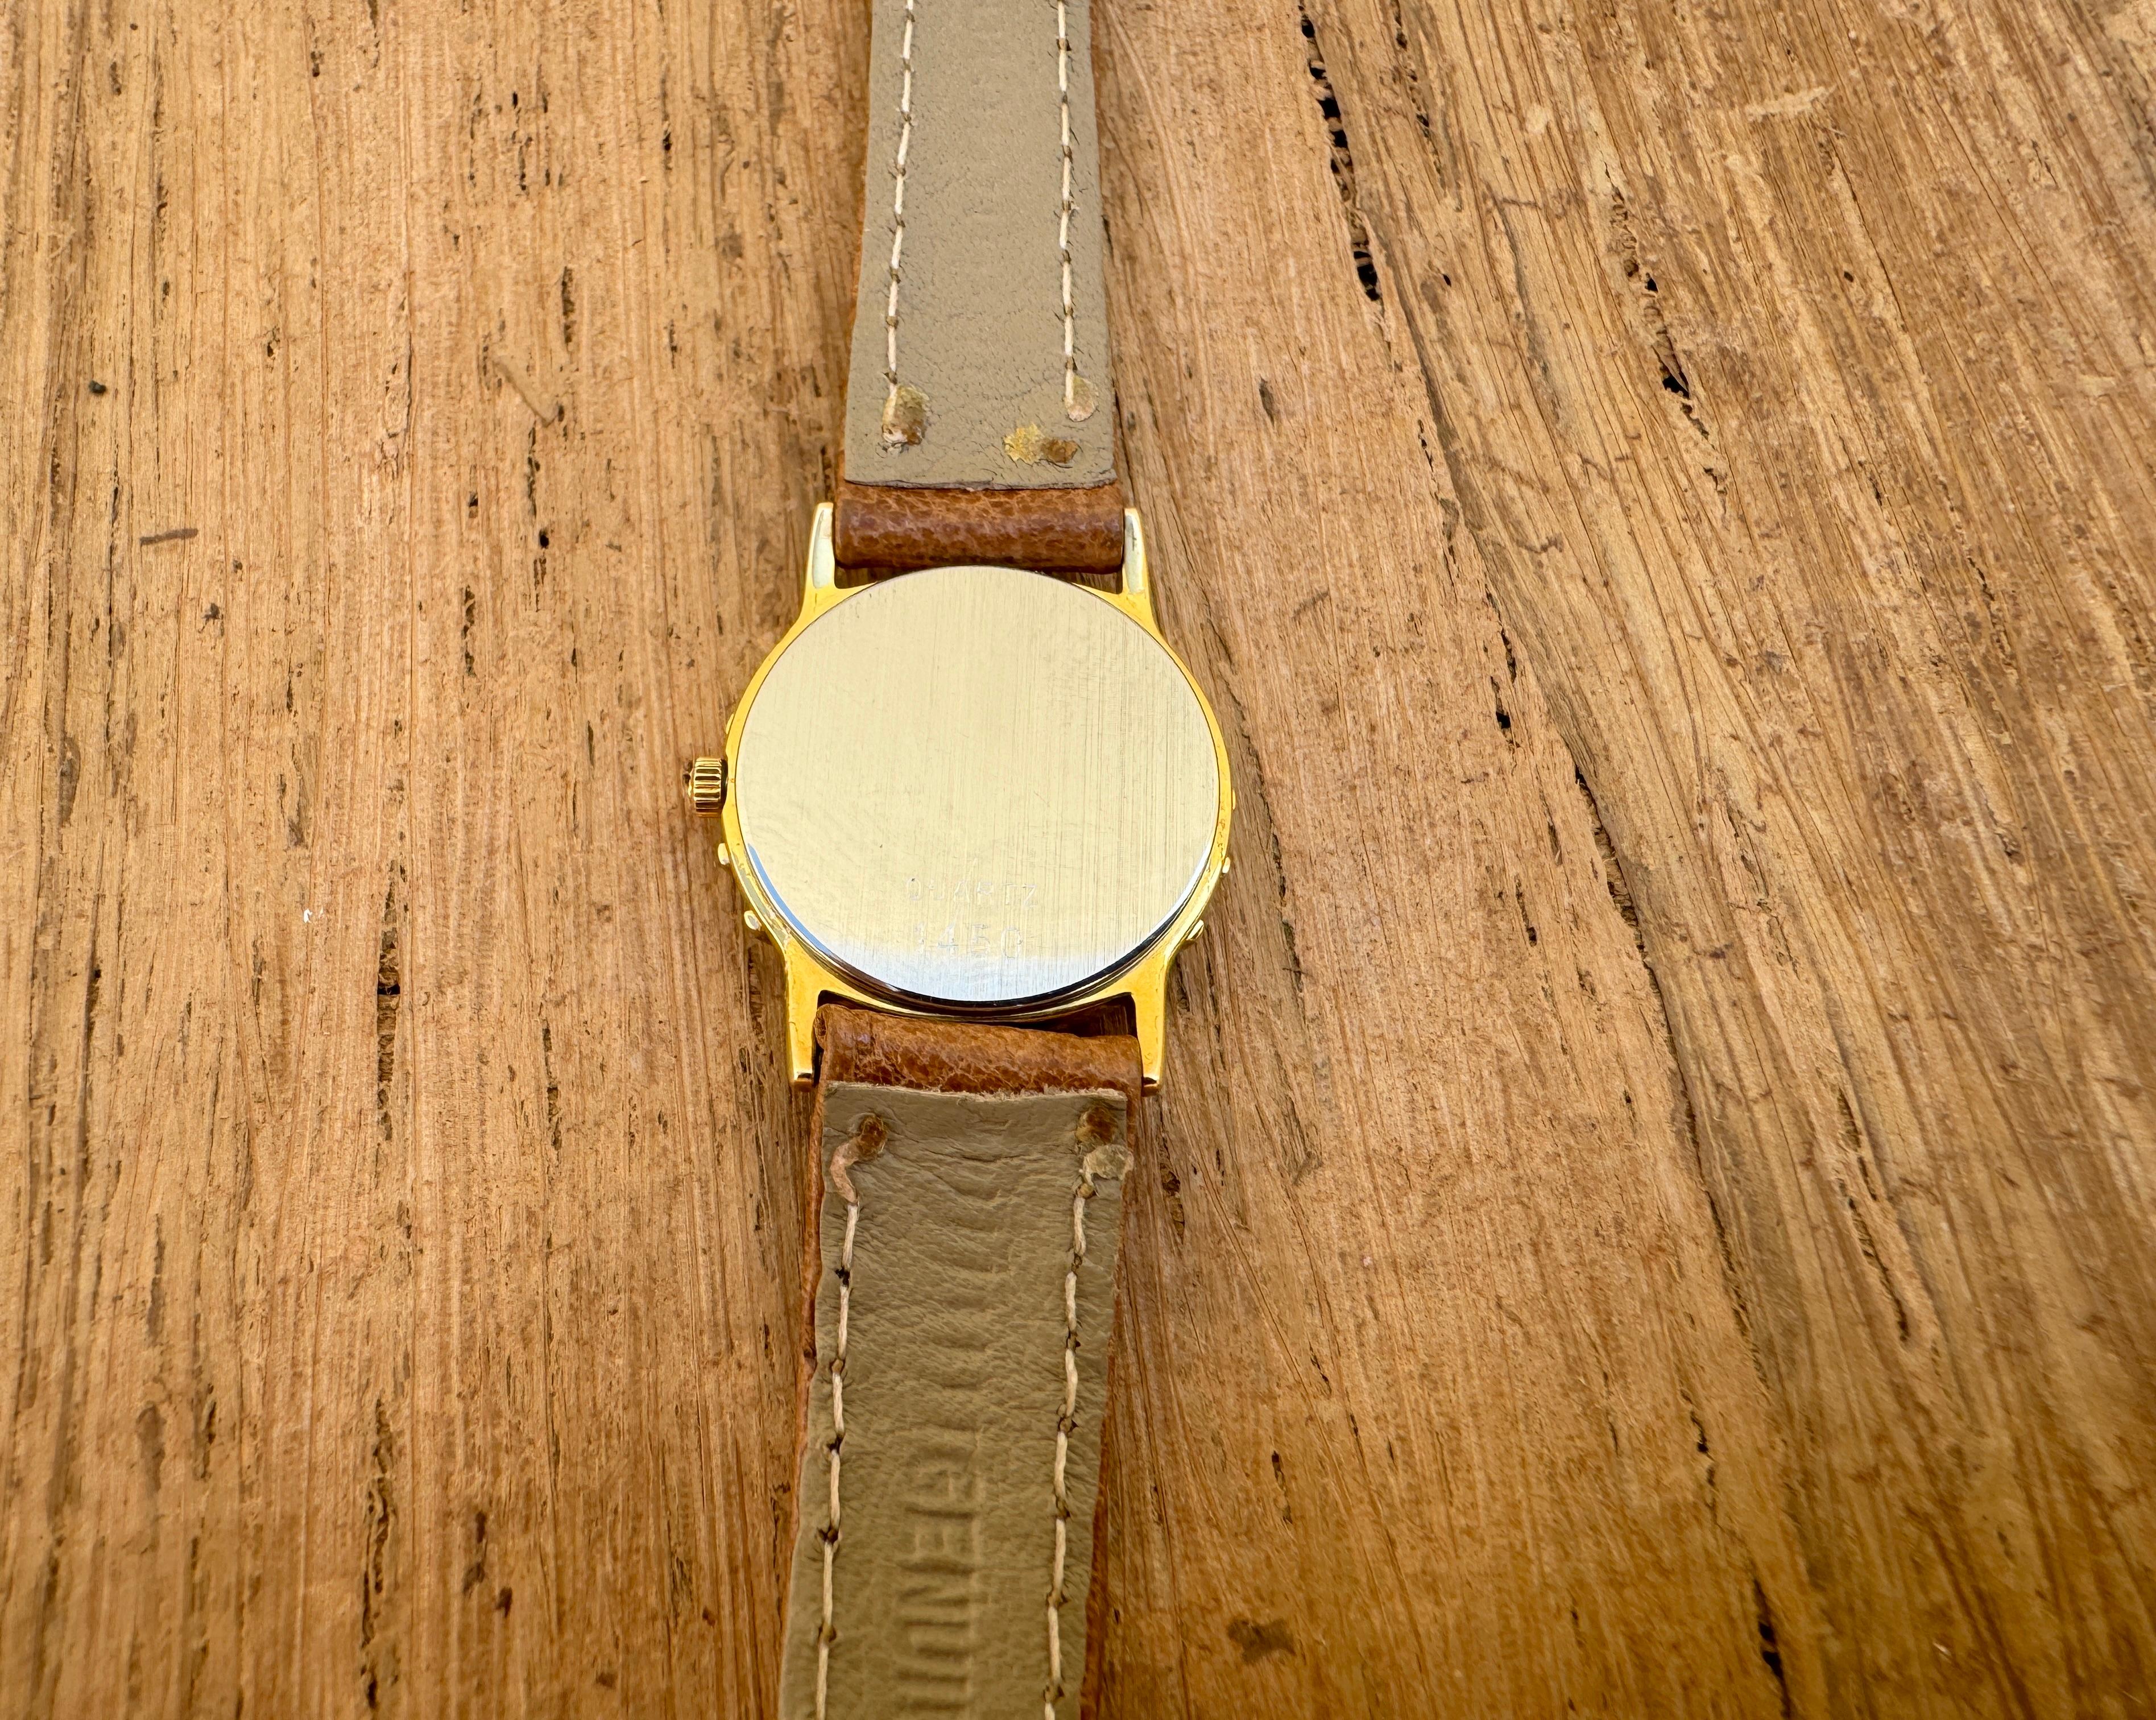 Omega De Ville cal 1450 Rare Lined Dial Ladies Vintage Watch In Good Condition For Sale In Toronto, CA